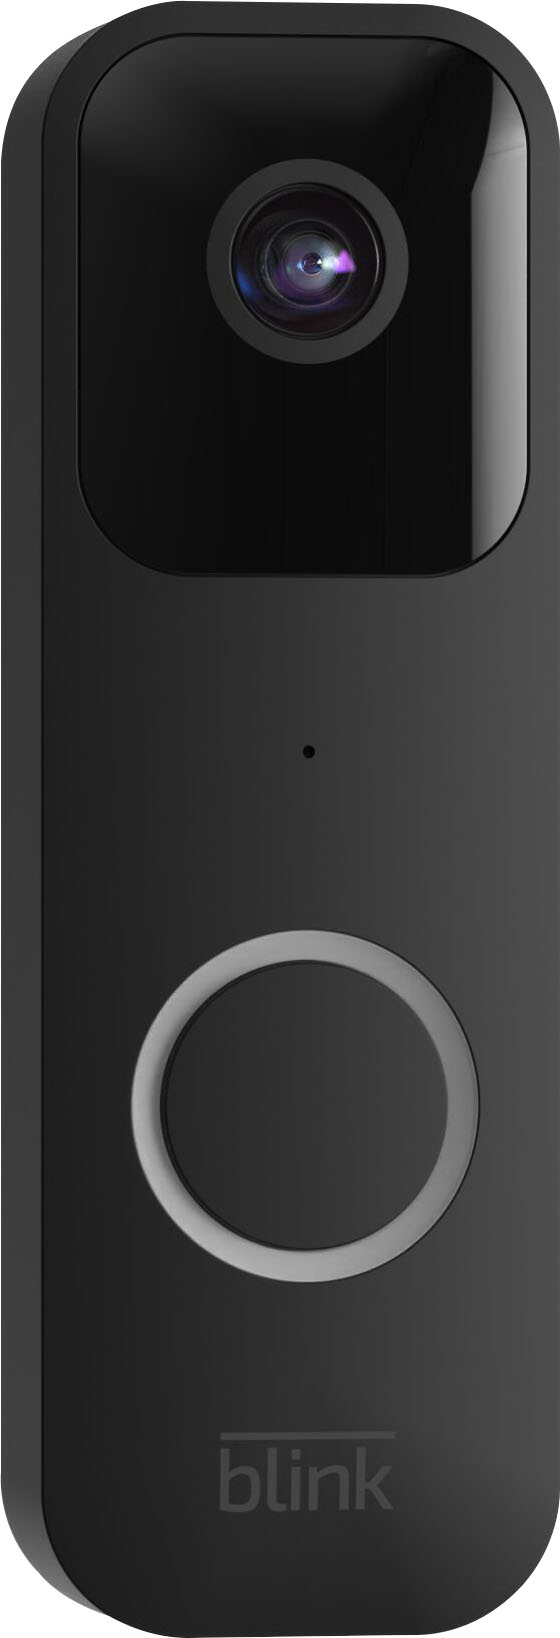 Angle View: Ring - Wired Doorbell Plus Smart Wi-Fi Video Doorbell - Satin Nickel